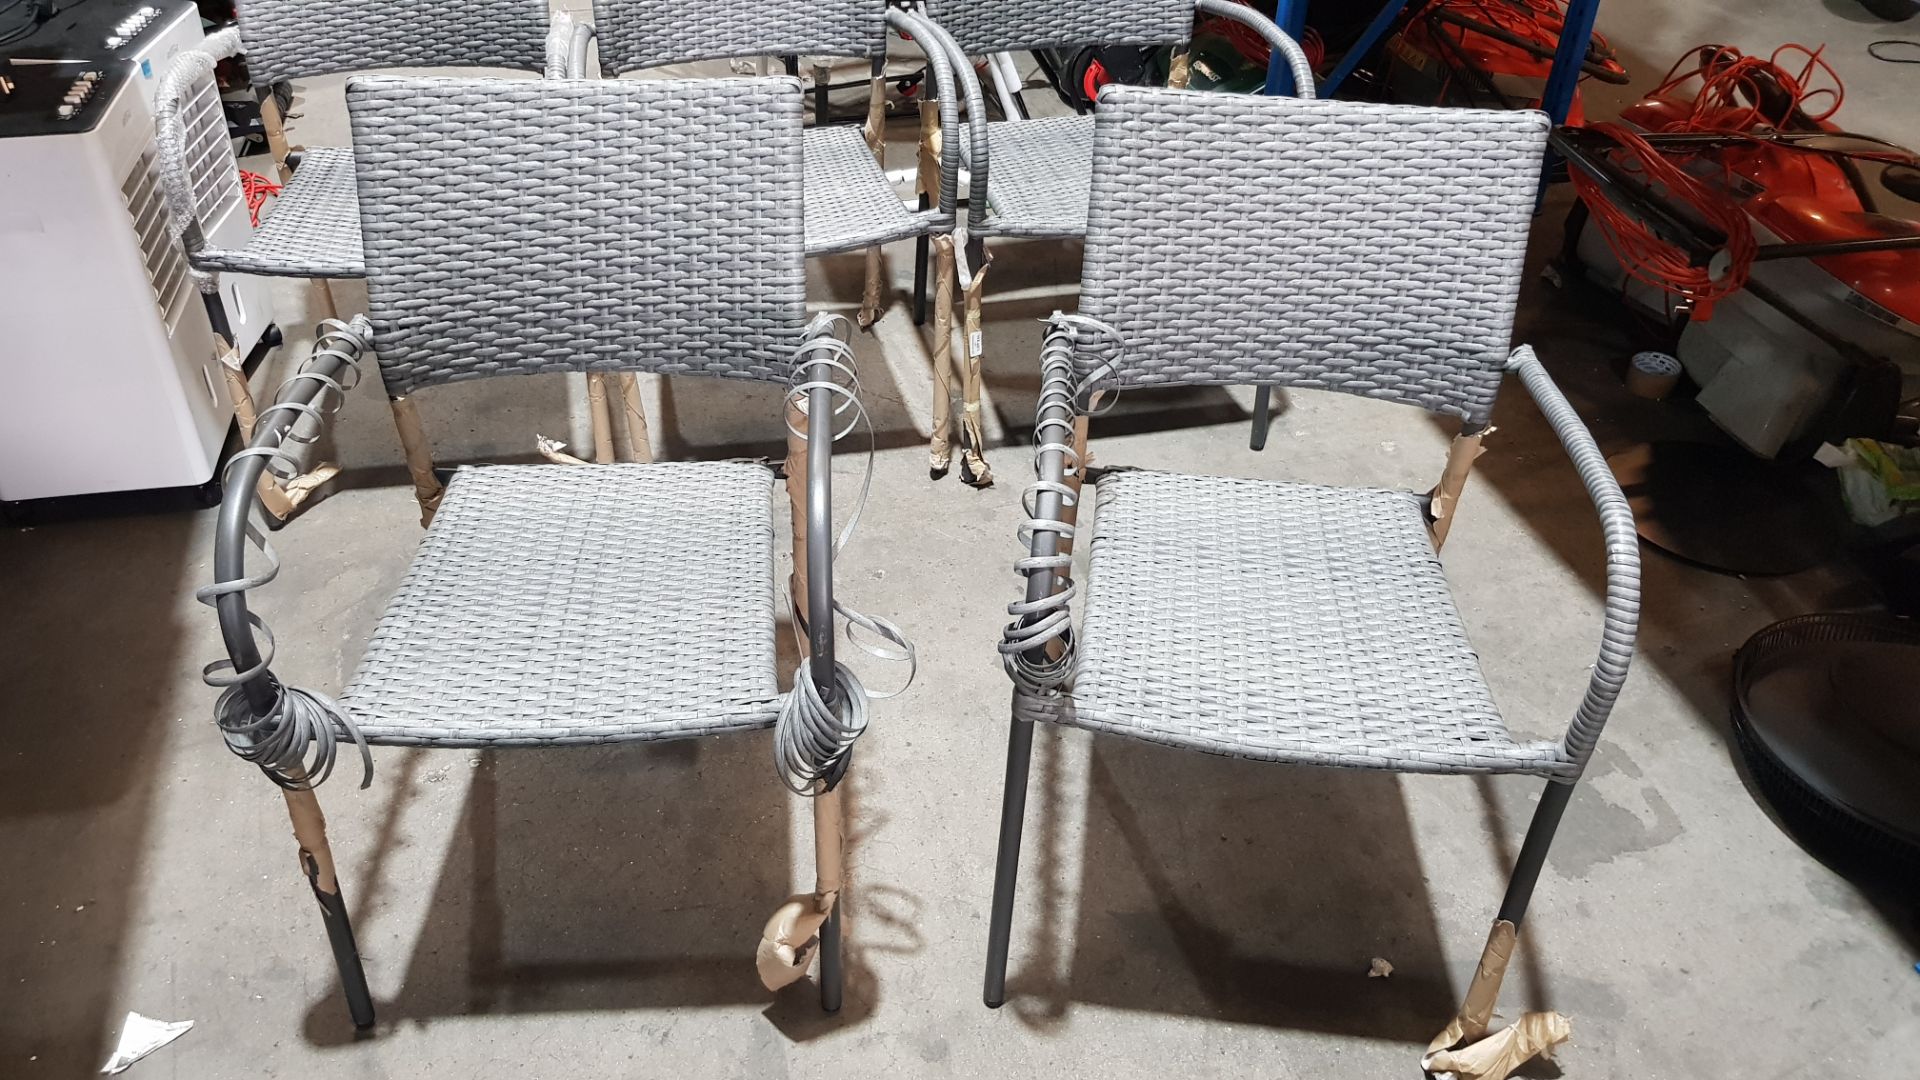 5x Grey Rattan Effect Stacking Chairs. 3x Appear Clean, Unused (2x Have Tag Attached). 2x Have Loos - Image 5 of 5